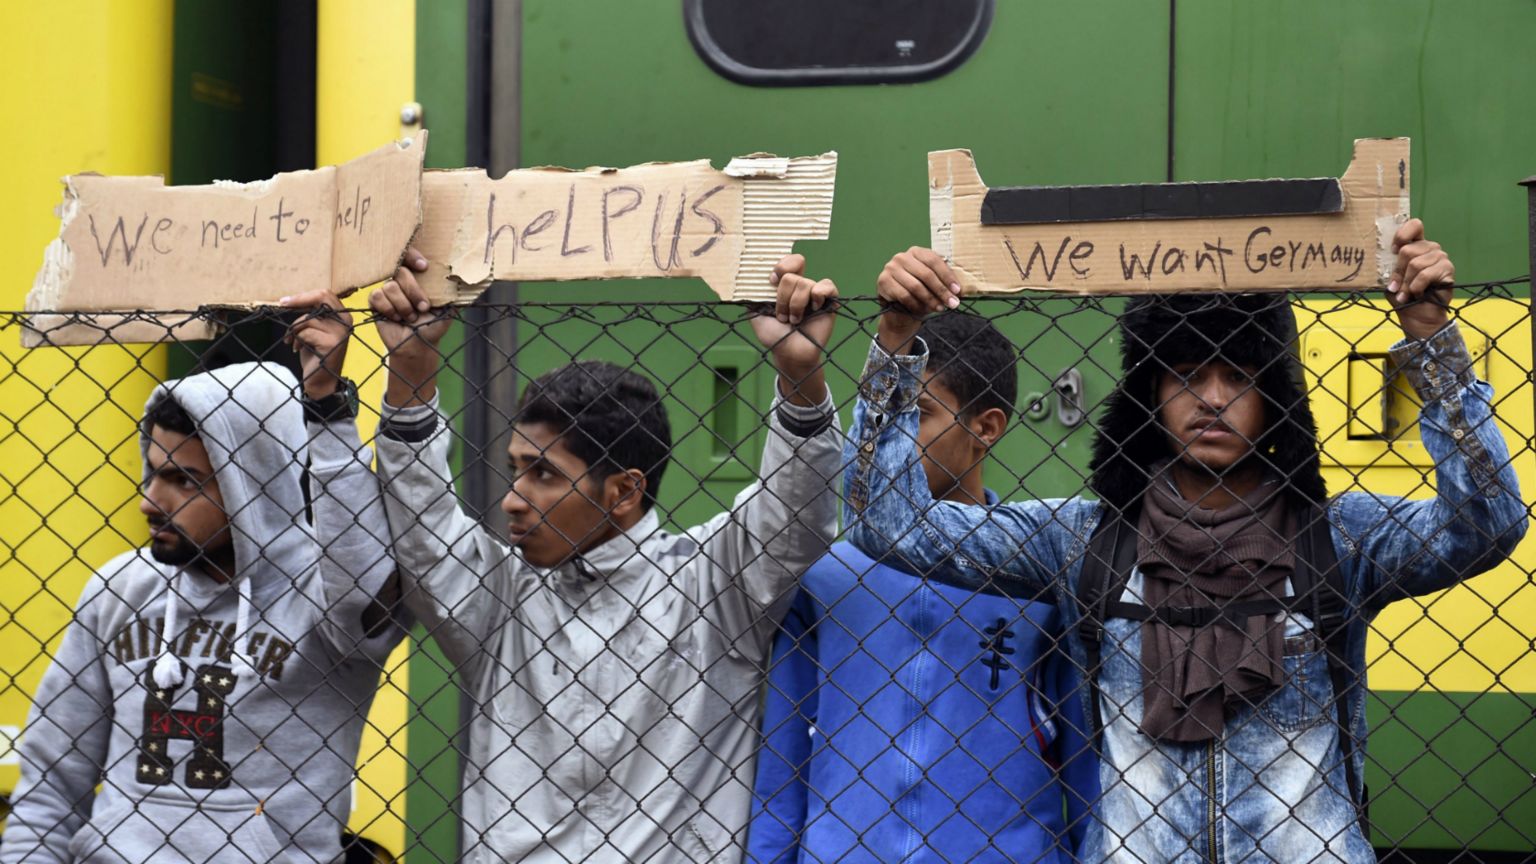 Migrants hold up signs at the Railway Station in Bicske, Hungary - 4 September 2015